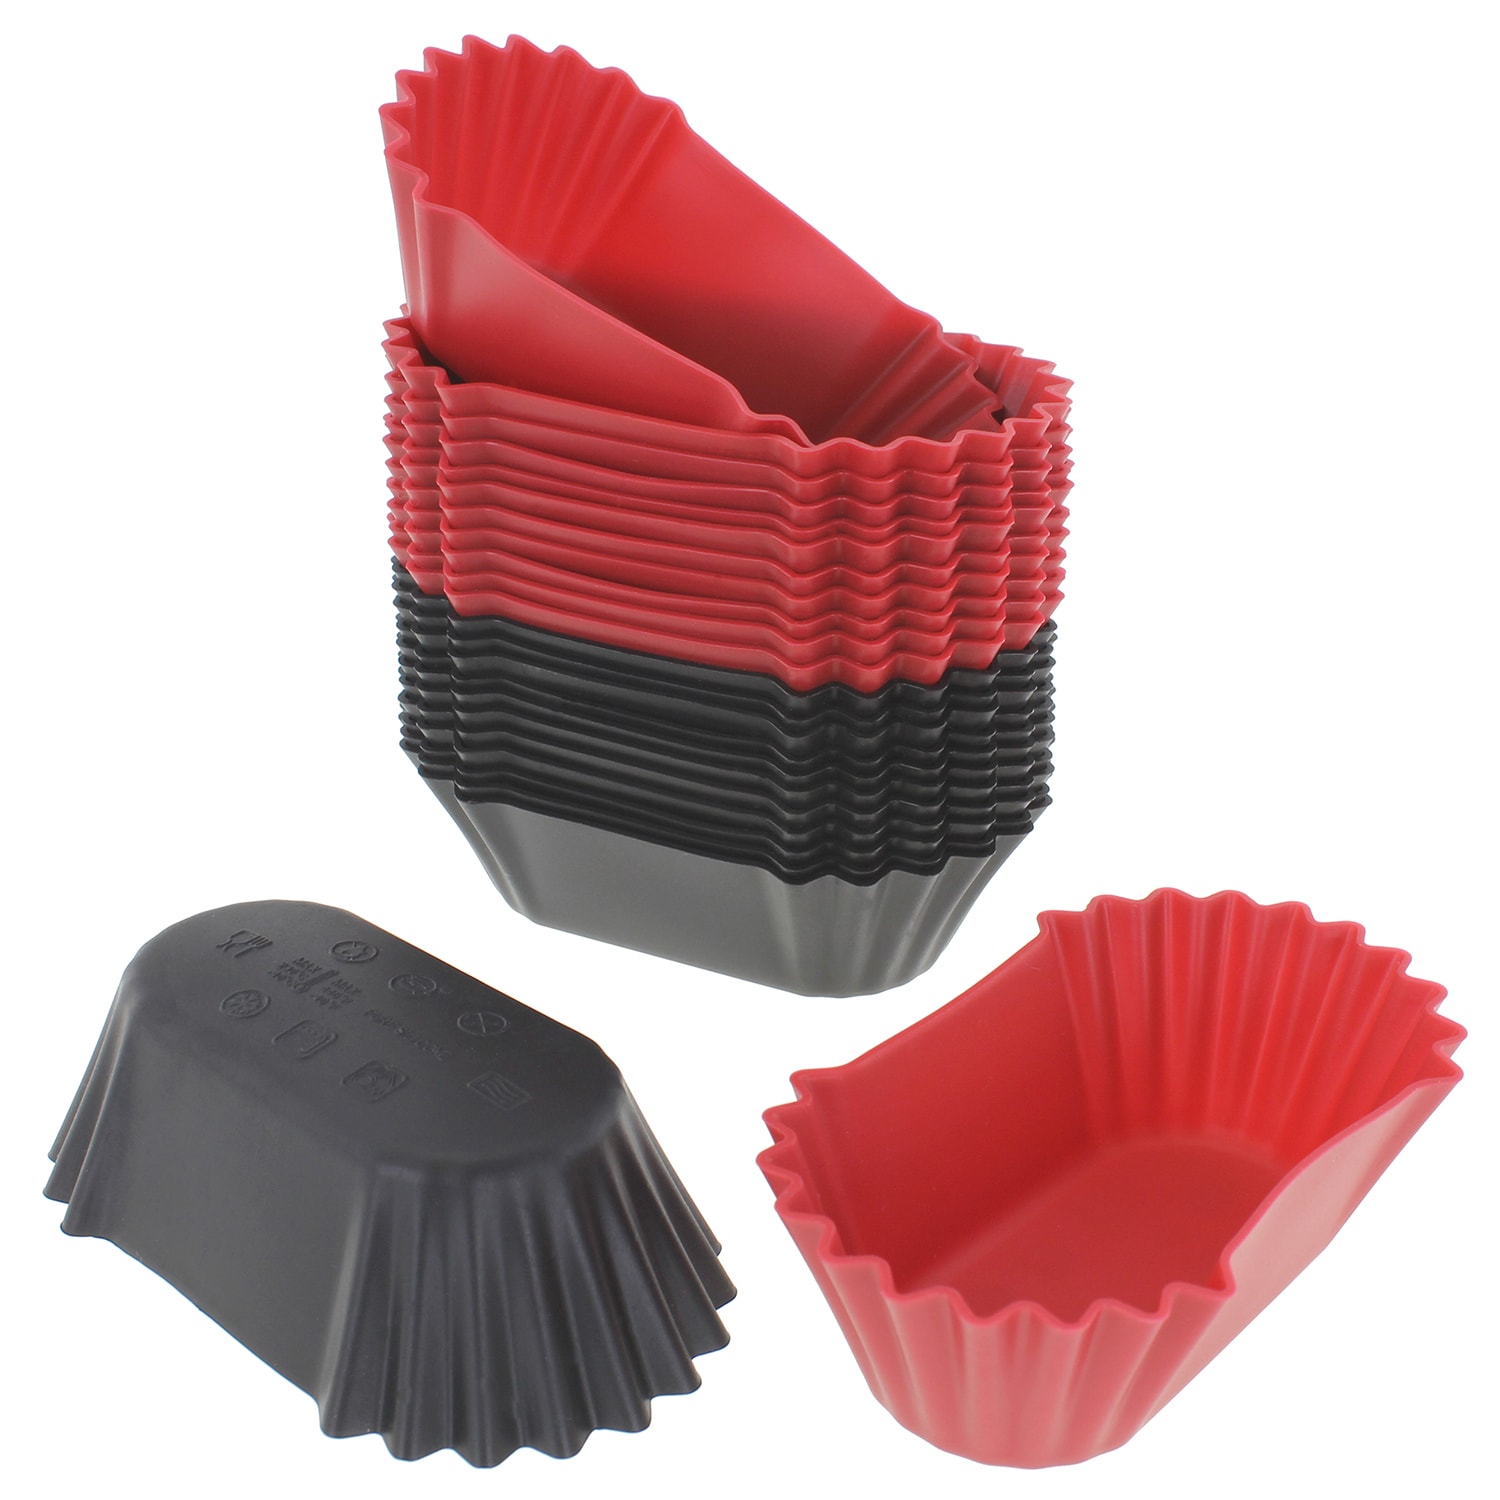 https://ak1.ostkcdn.com/images/products/10480217/Freshware-24-pack-Black-and-Red-Silicone-Jumbo-Rectangle-Round-Reusable-Cupcake-and-Muffin-Baking-Cup-b0c3fdc8-2e0d-4dfb-853f-4ae99c6252a7.jpg